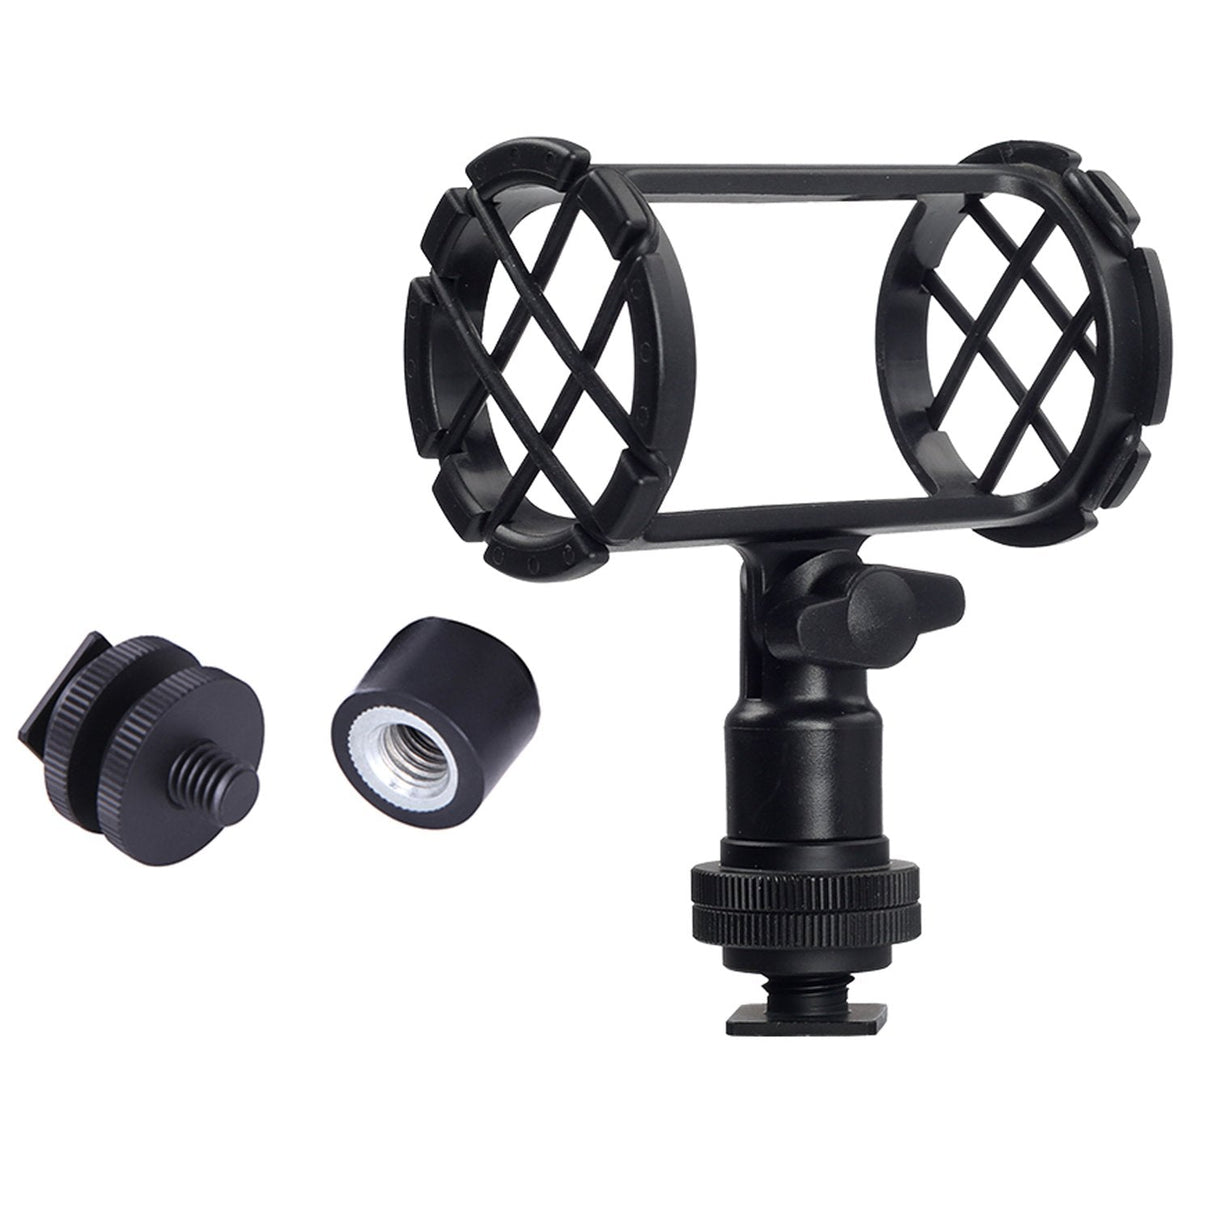 Boya BY-C04 Camera Microphone Shockmount with Hot Shoe Mount for AKG D230 Senheisser ME66 Rode NTG-2 NTG-1 Audio-Technica AT-875R